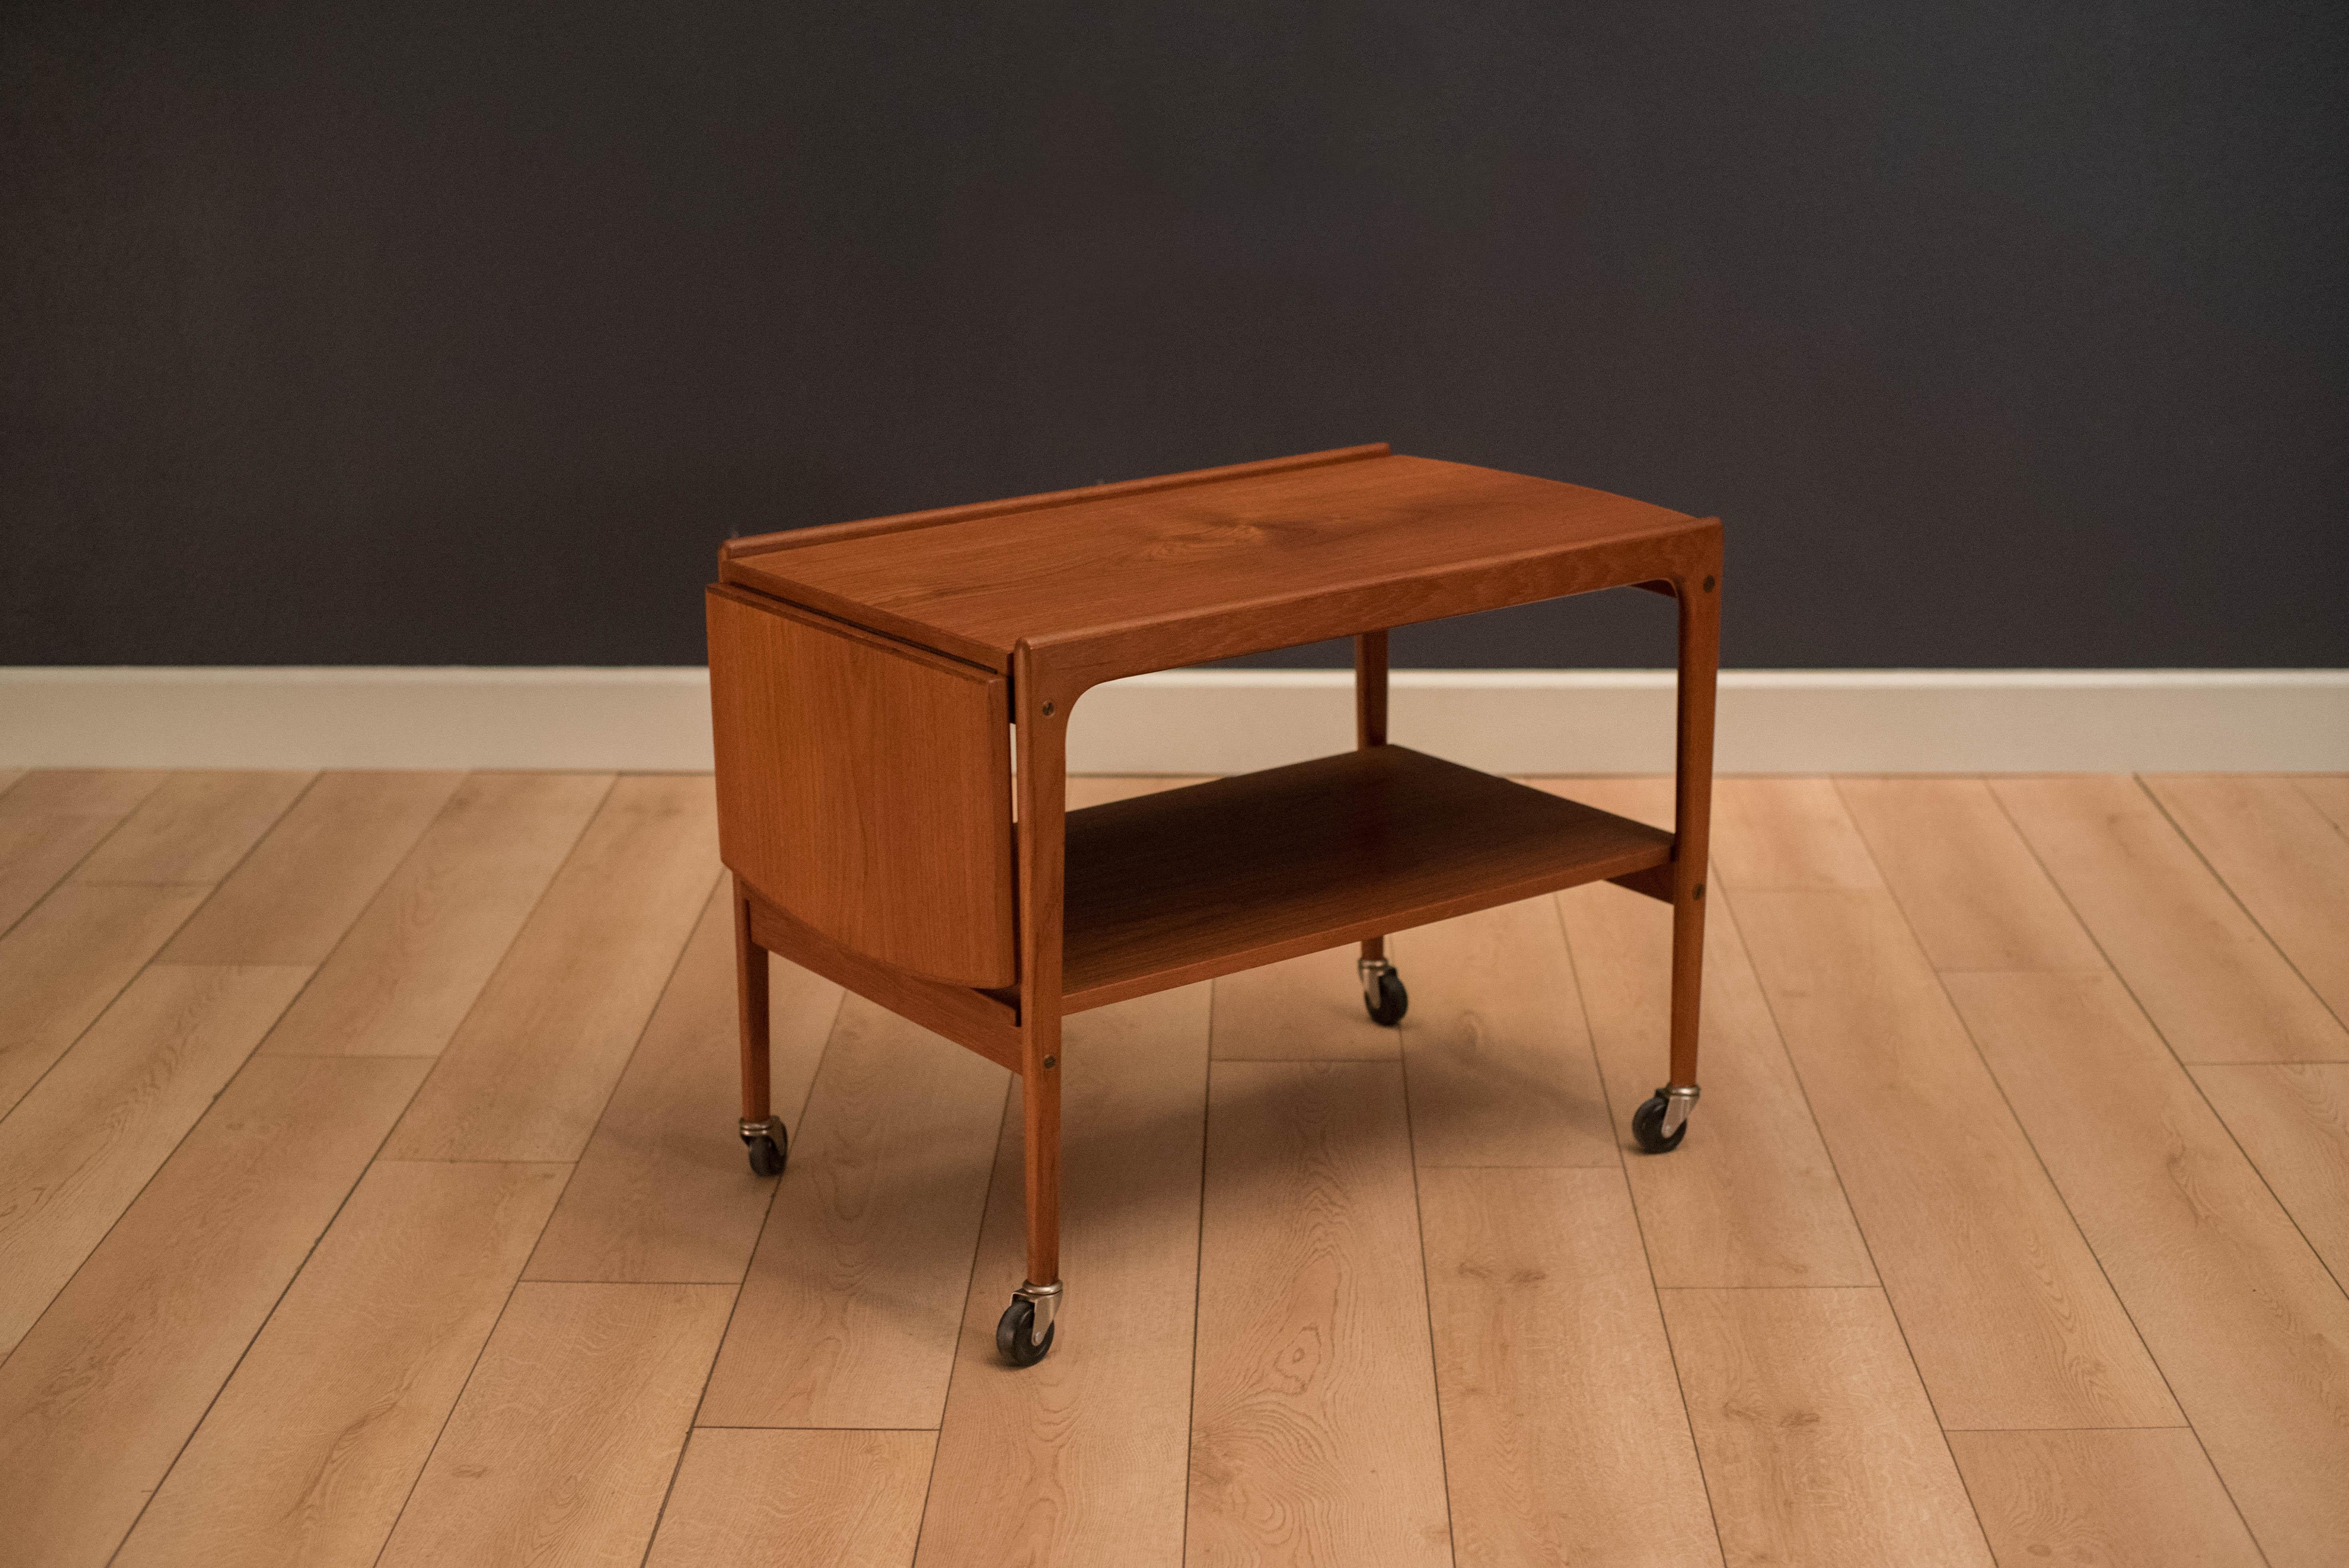 Mid-Century Modern tea cart or trolley in teak circa 1960s. This versatile piece is equipped with a drop leaf that slides to extend for a wider serving space. Features two tiers for extra storage display. 

Measures: Top extends 42.5